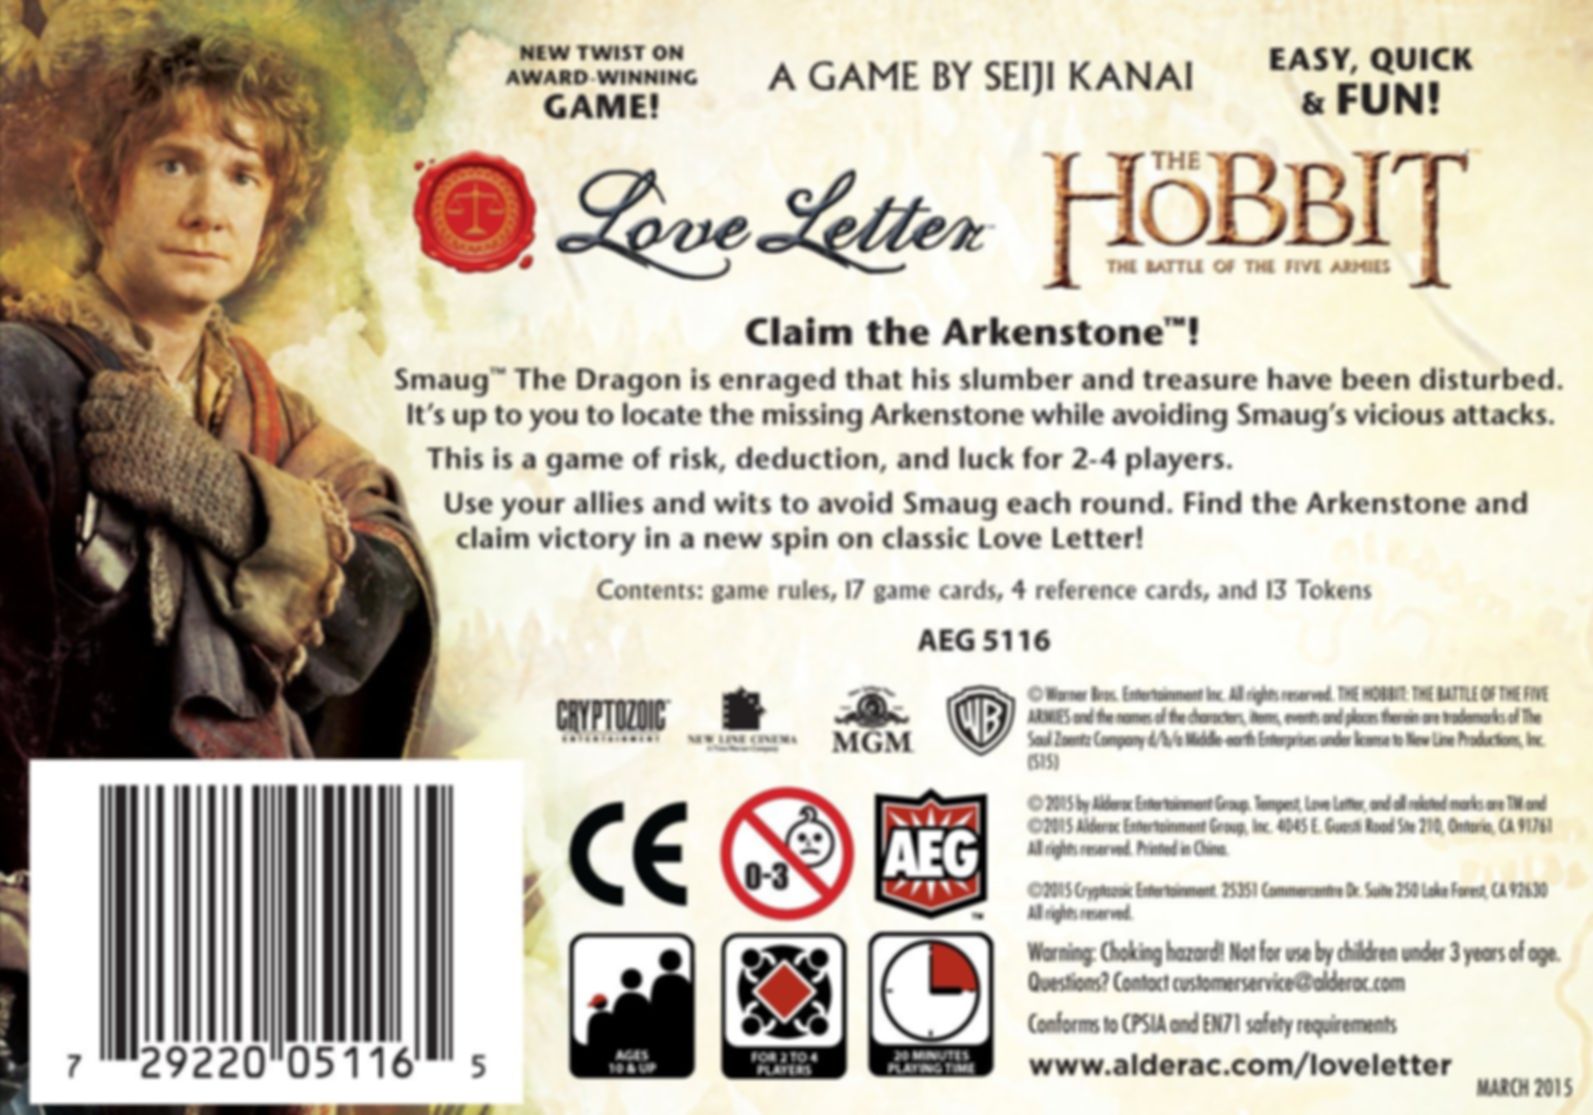 Love Letter: The Hobbit - The Battle of the Five Armies back of the box